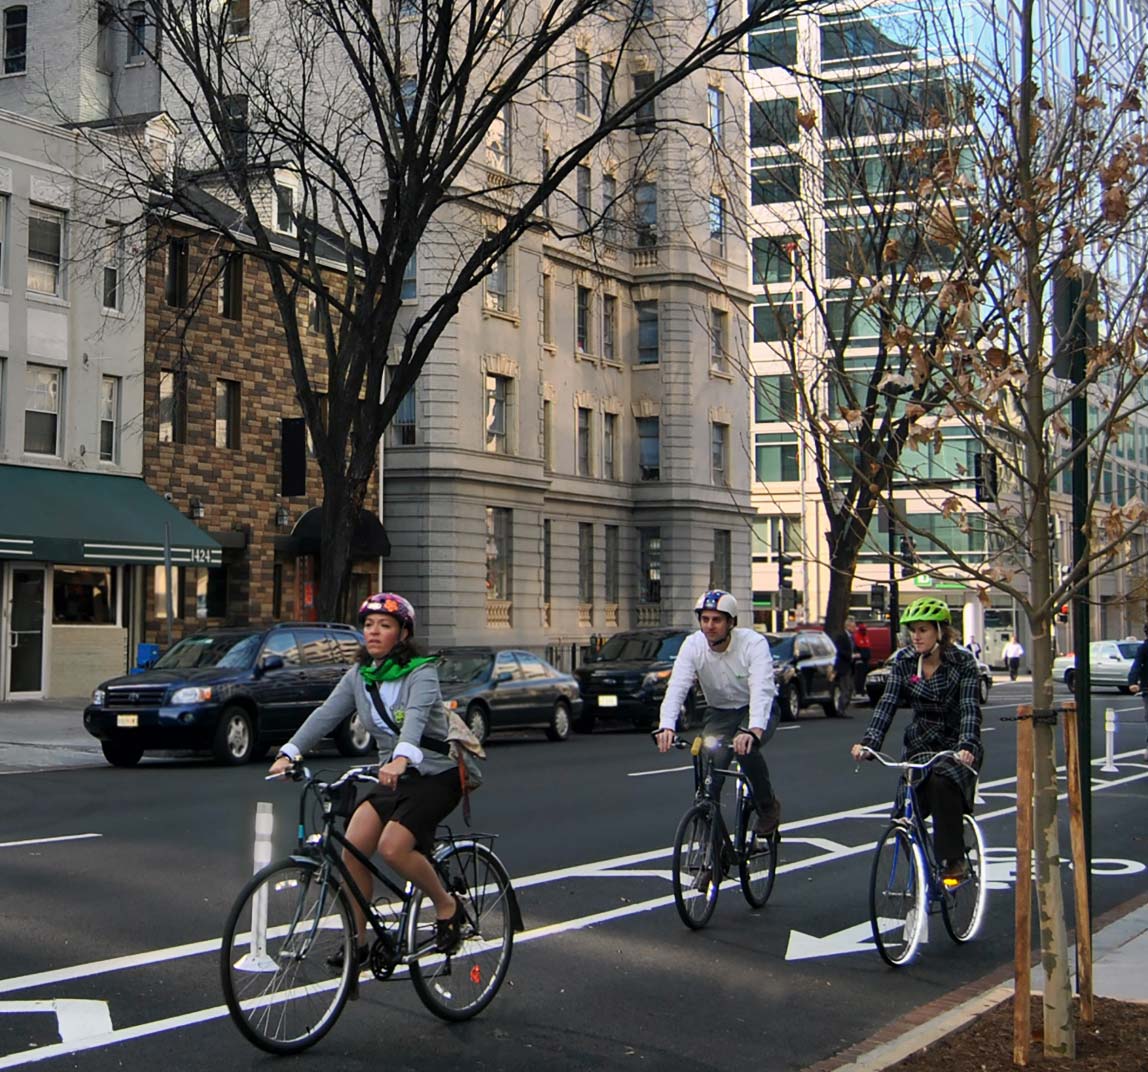 Photo: This photograph, taken from the edge of the roadway, shows three bicyclists traveling in a buffered bicycle lane toward the foreground of the image in an urban setting. To the left of the bicycle lane are two general travel lanes with on-street parking. The bicycle lane is separated from the roadway with white pavement markings and vertical posts. The bicycle lane is marked with a helmeted bicyclist symbol and directional arrow. To the right of the bicycle lane is concrete curb and sidewalk.